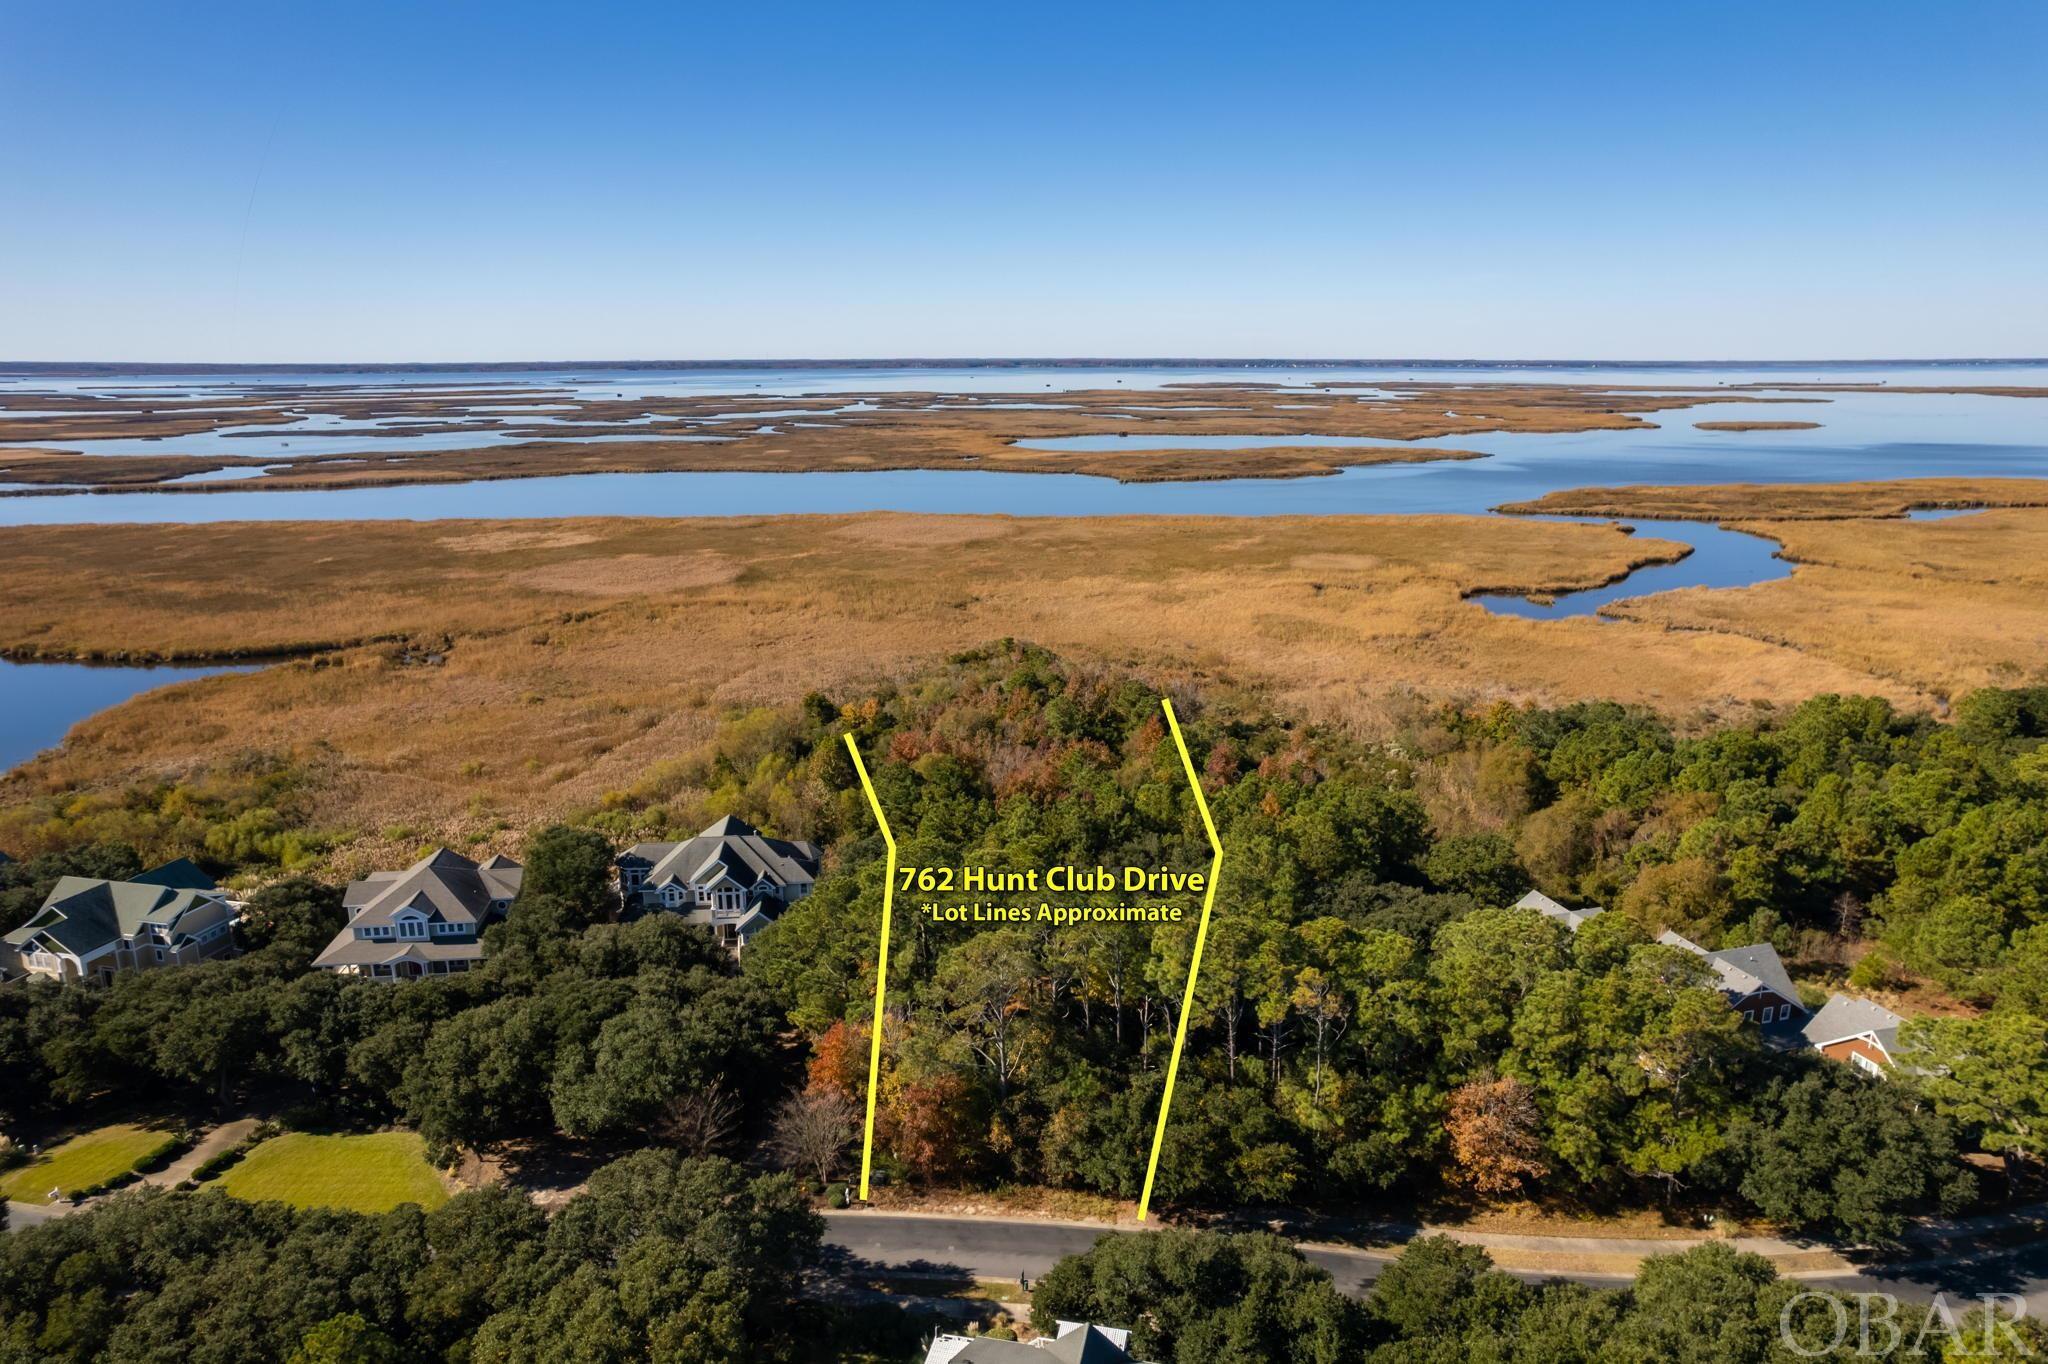 Build your custom home on this soundfront parcel located in the gated community of The Currituck Club.  This large, private homesite promises the opportunity to enjoy gorgeous views of sound and sunset in one of the most sought after amenity-rich communities on the OBX.  The Currituck Club offers in-season concierge & trolley service, a fitness center, community pools, tennis & basketball courts, membership to the renowned Ree Jones deigned 18-hole golf course, and more.  Close to shopping, restaurants and attractions, this parcel is the spot for your own custom-built dream home!